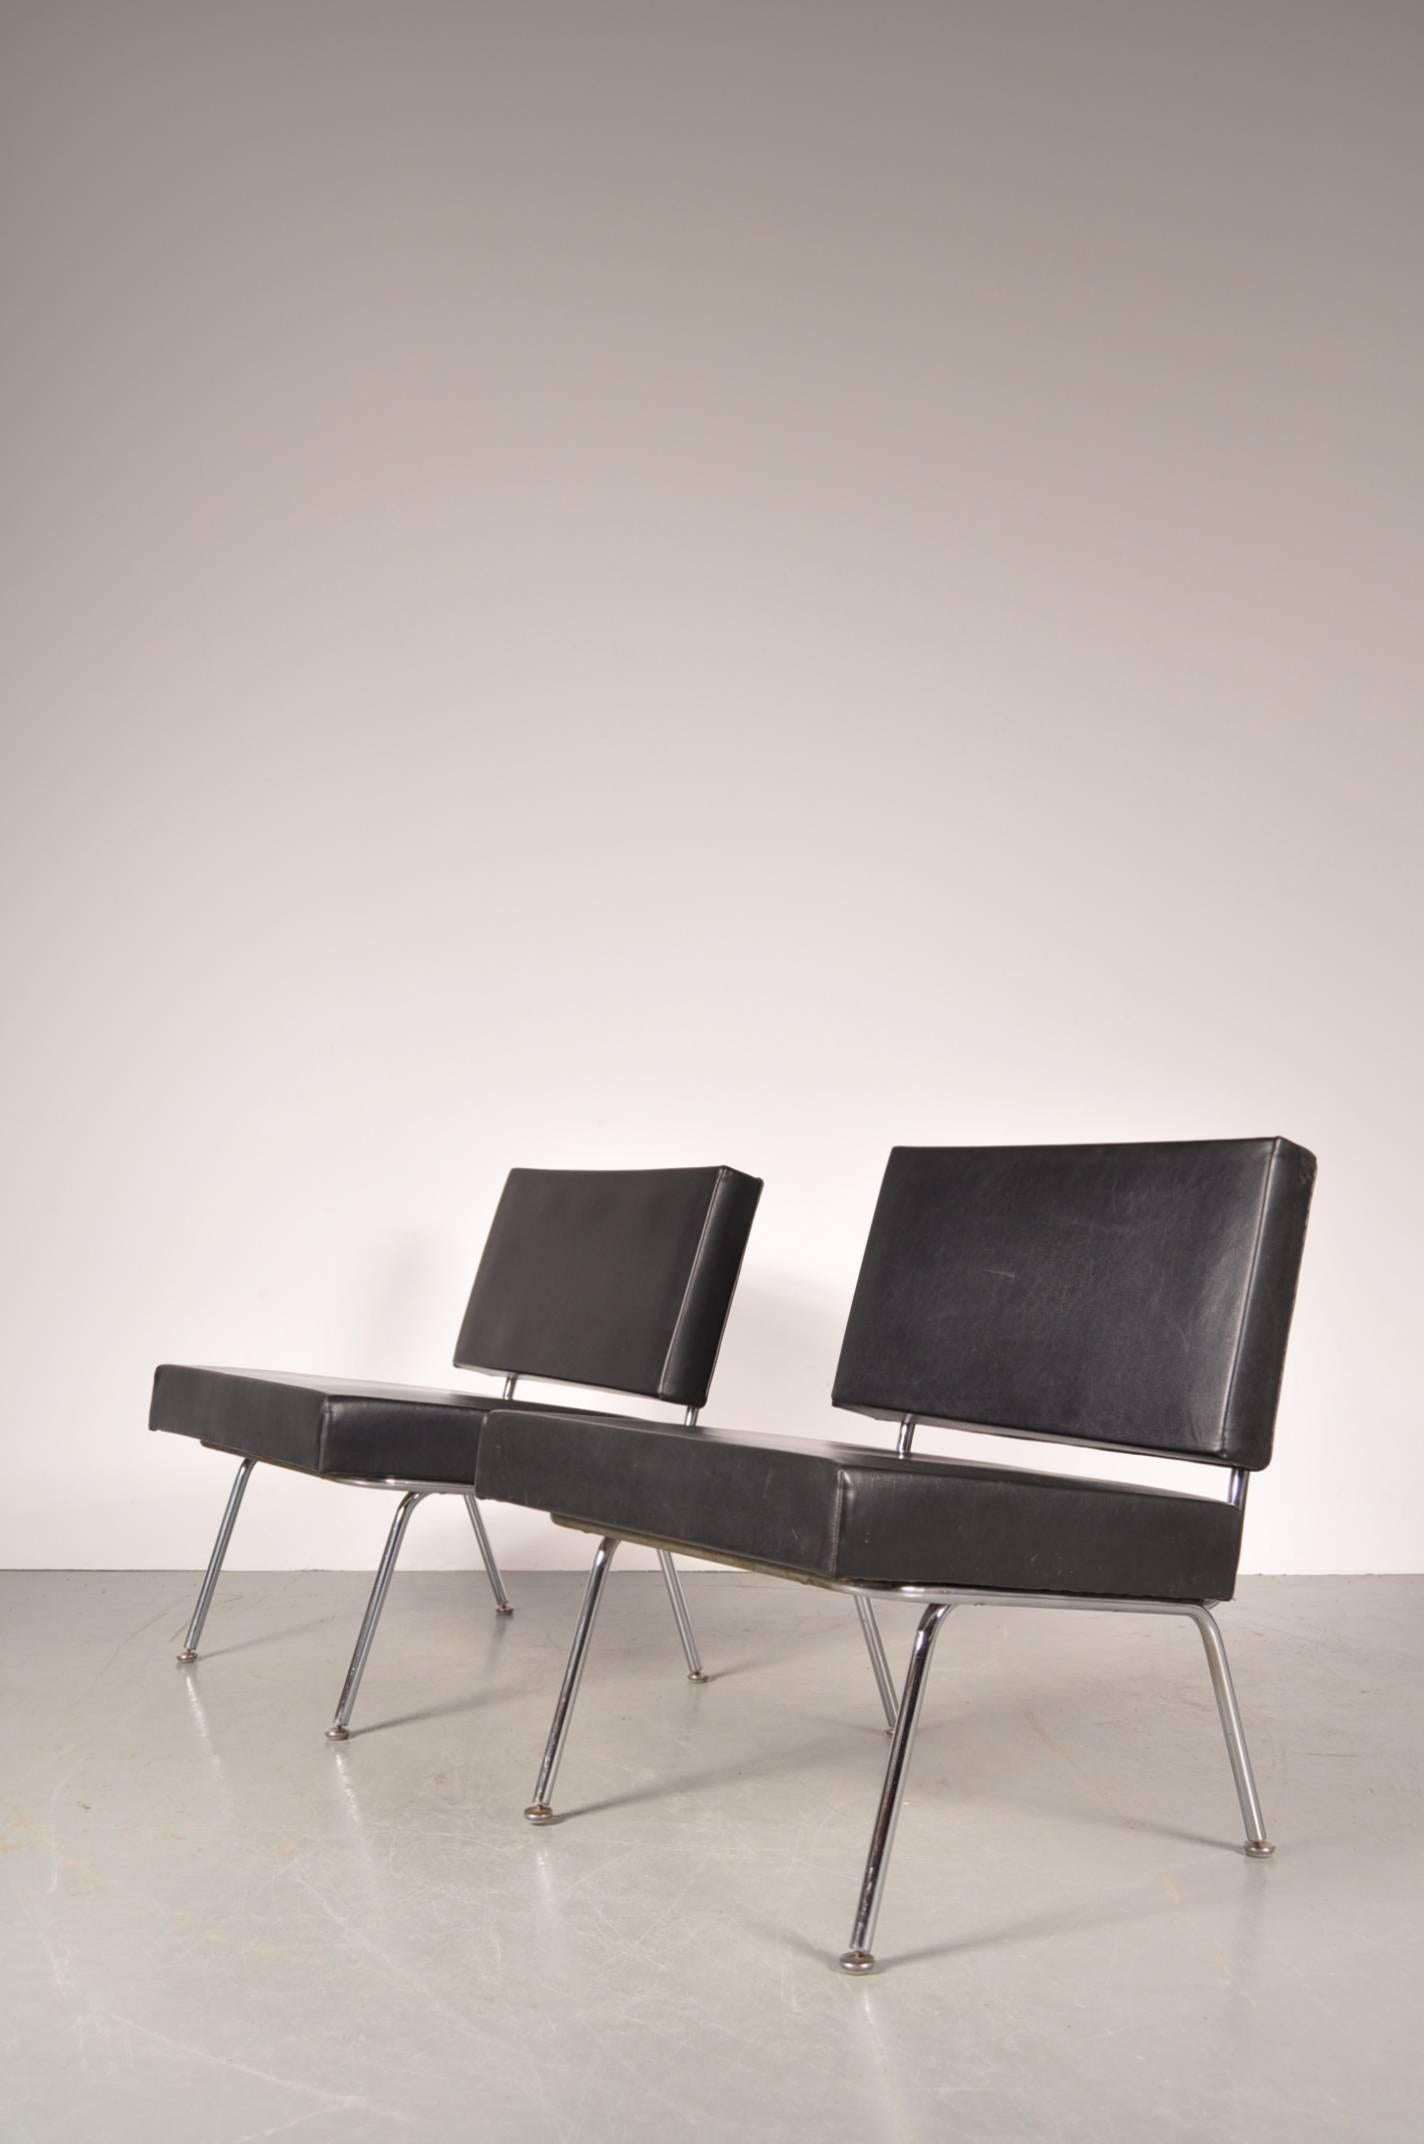 American Set of Two Model 31 Easy Chairs by Florence Knoll for Knoll Int., circa 1960